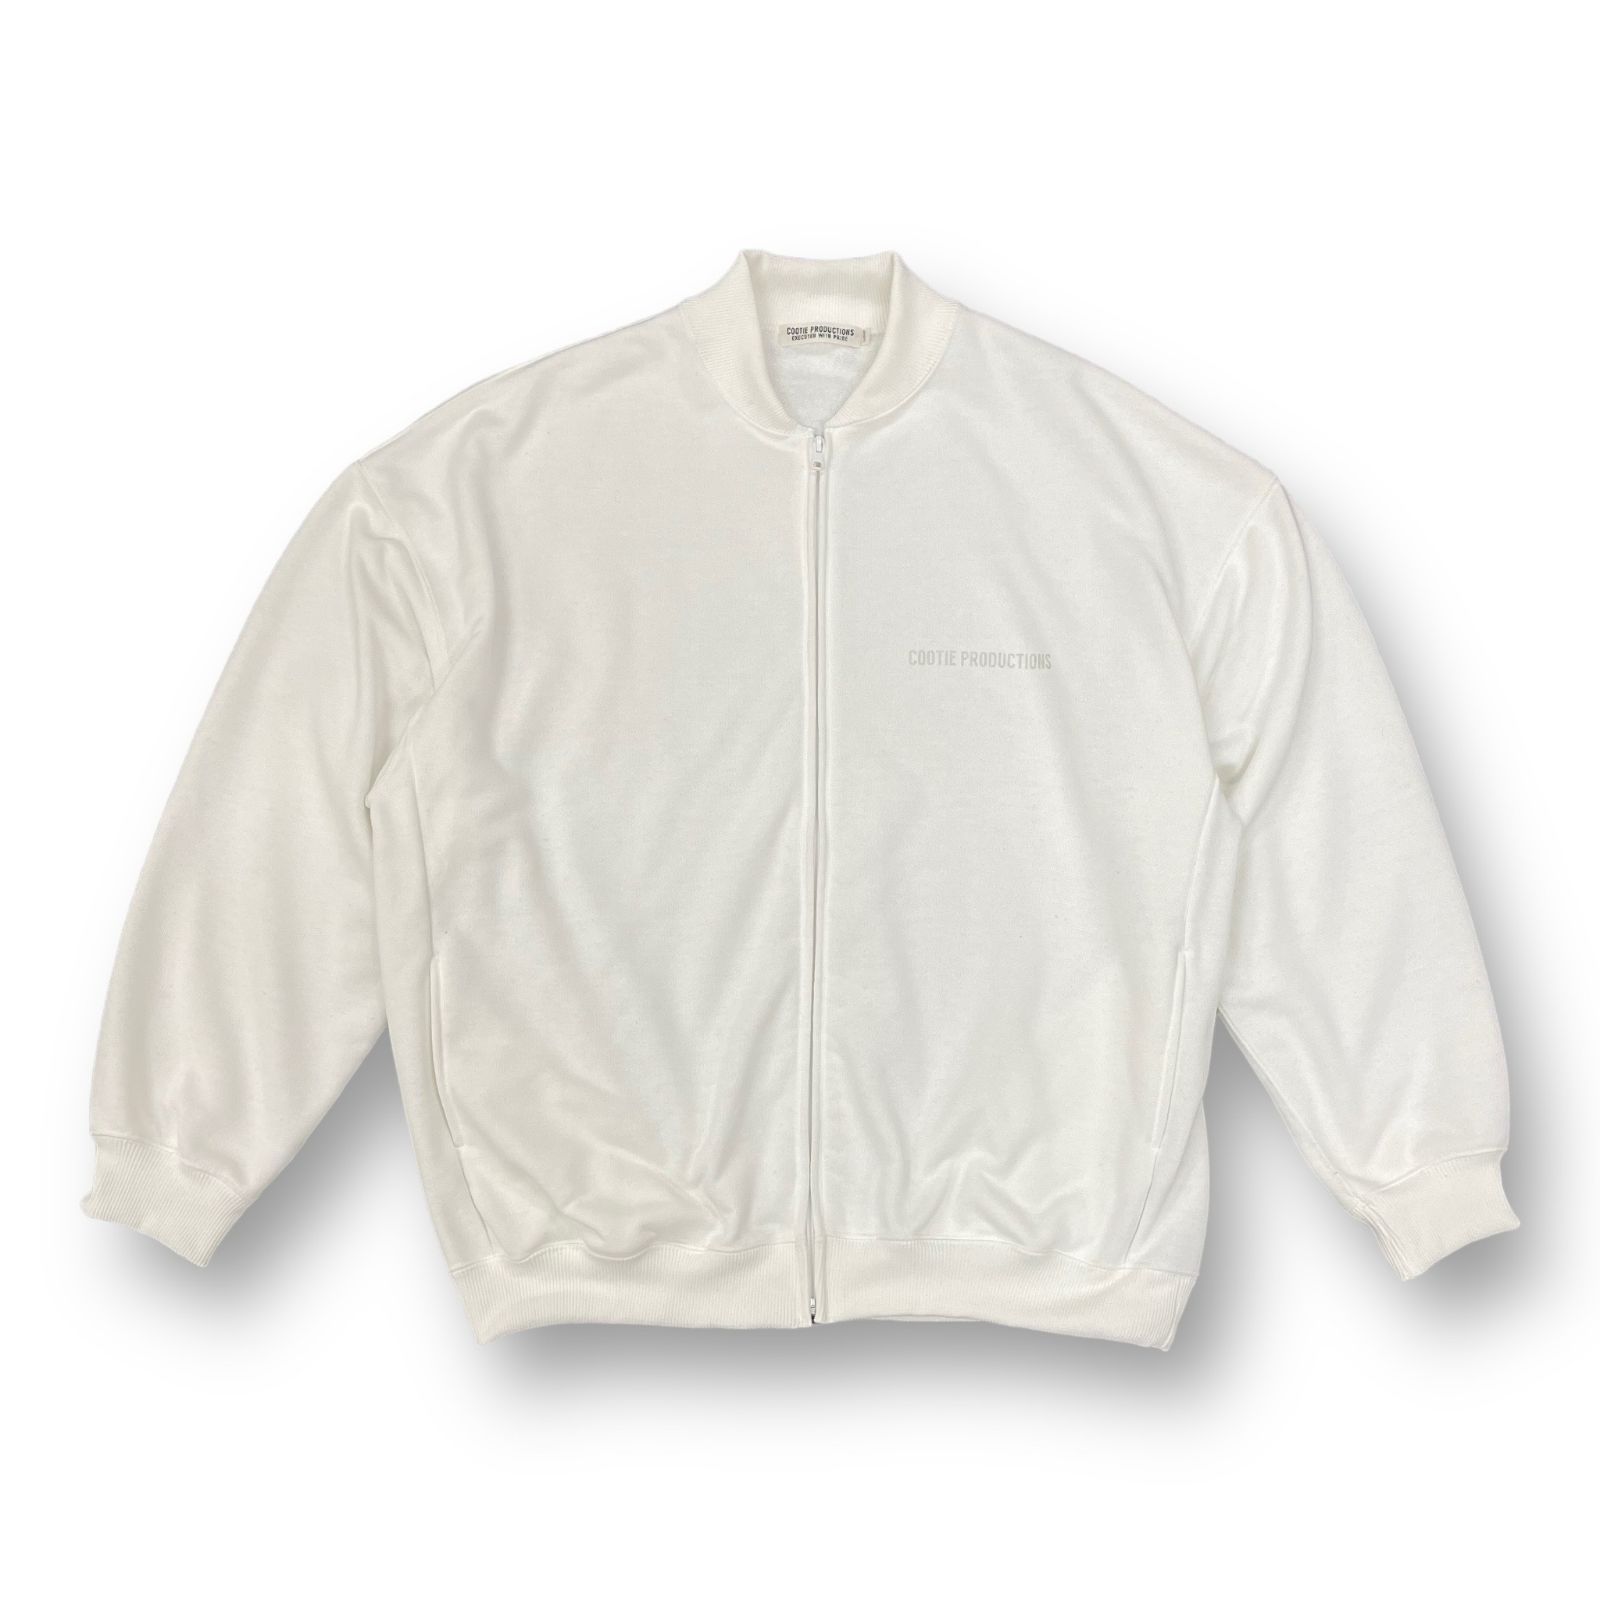 COOTIE Dry Tech Sweat Track Jacket クーティー